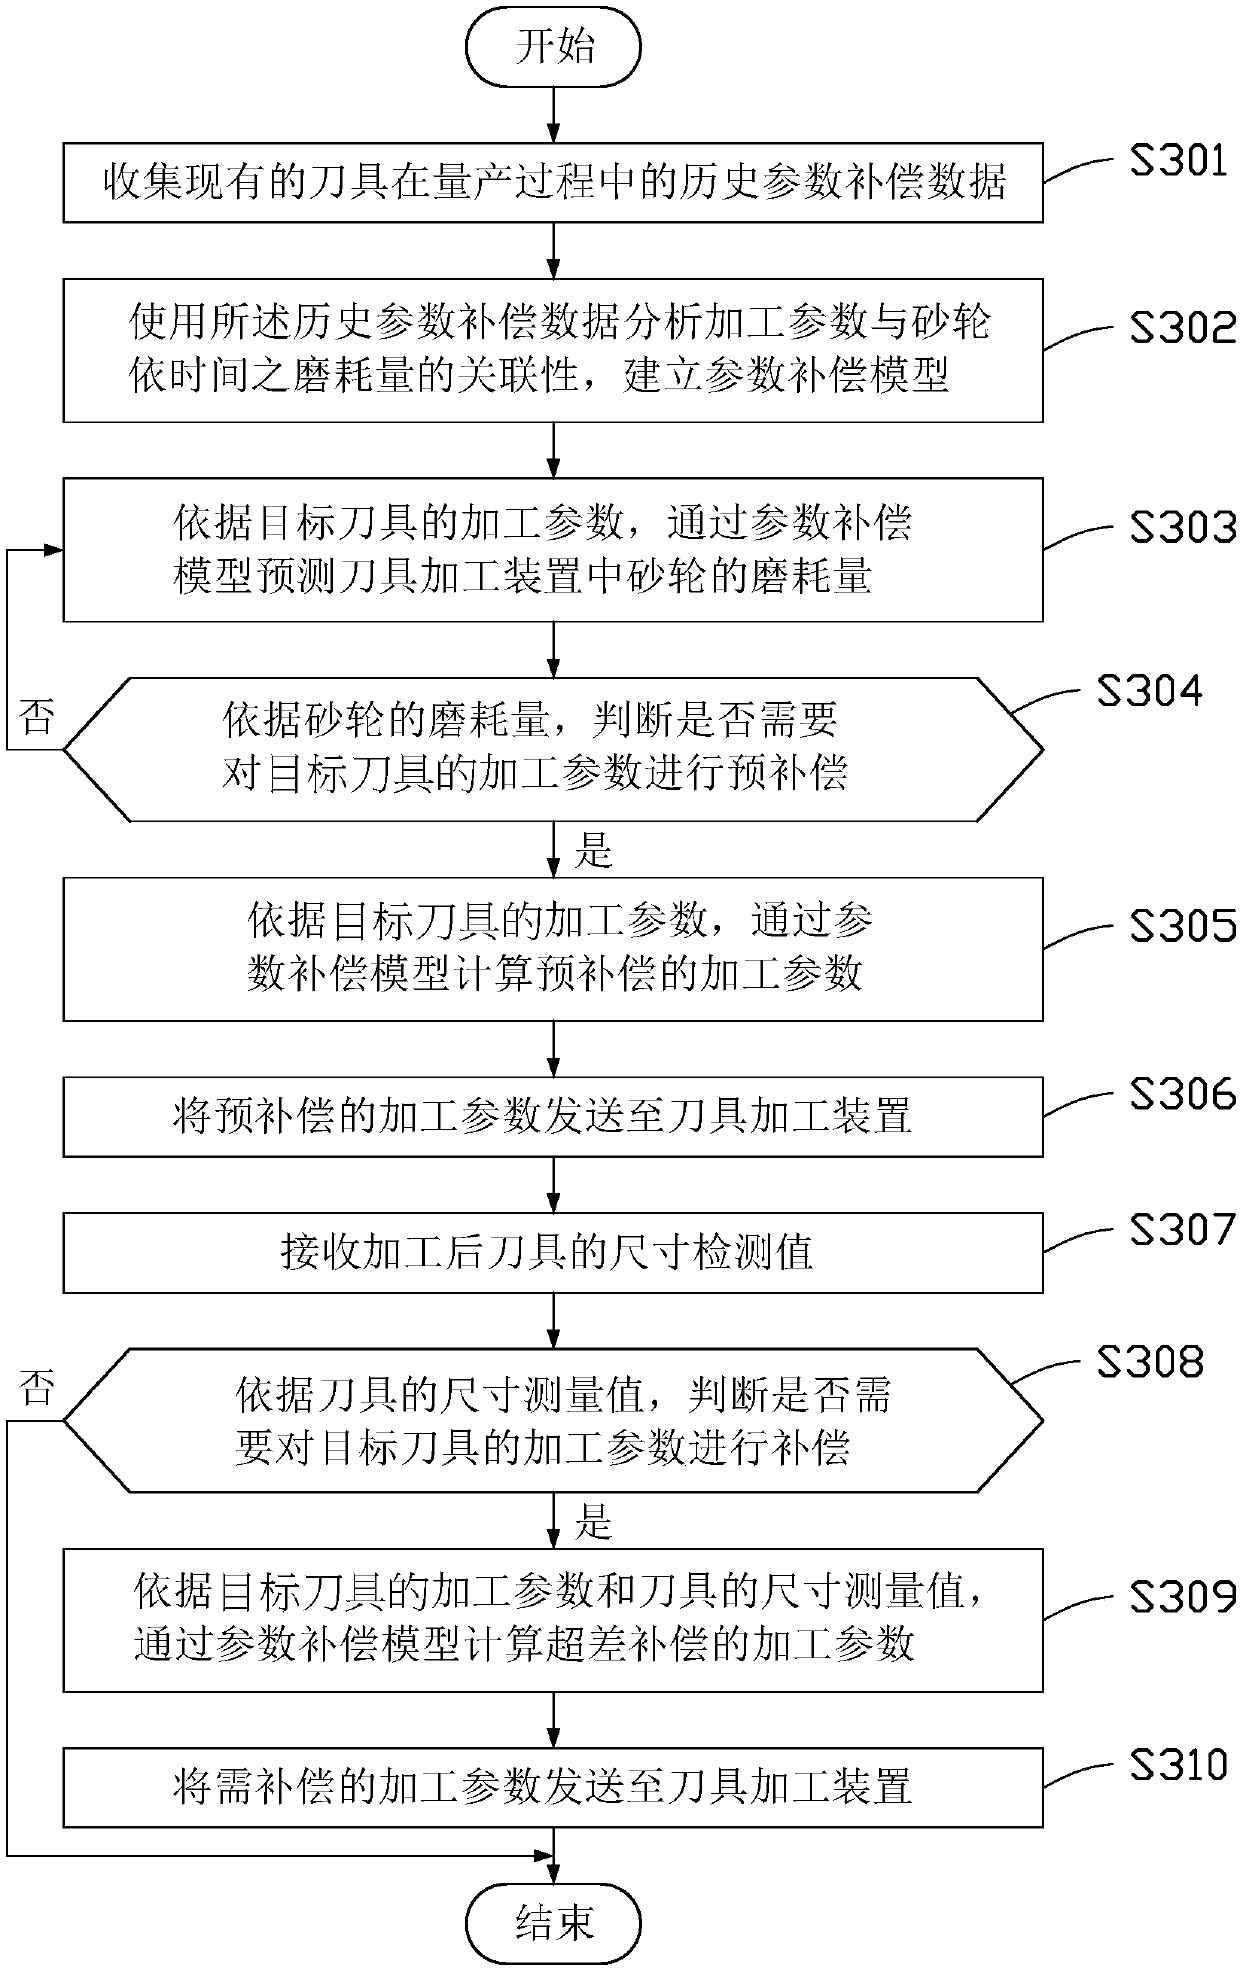 Compensation device and compensation method for cutter machining parameters